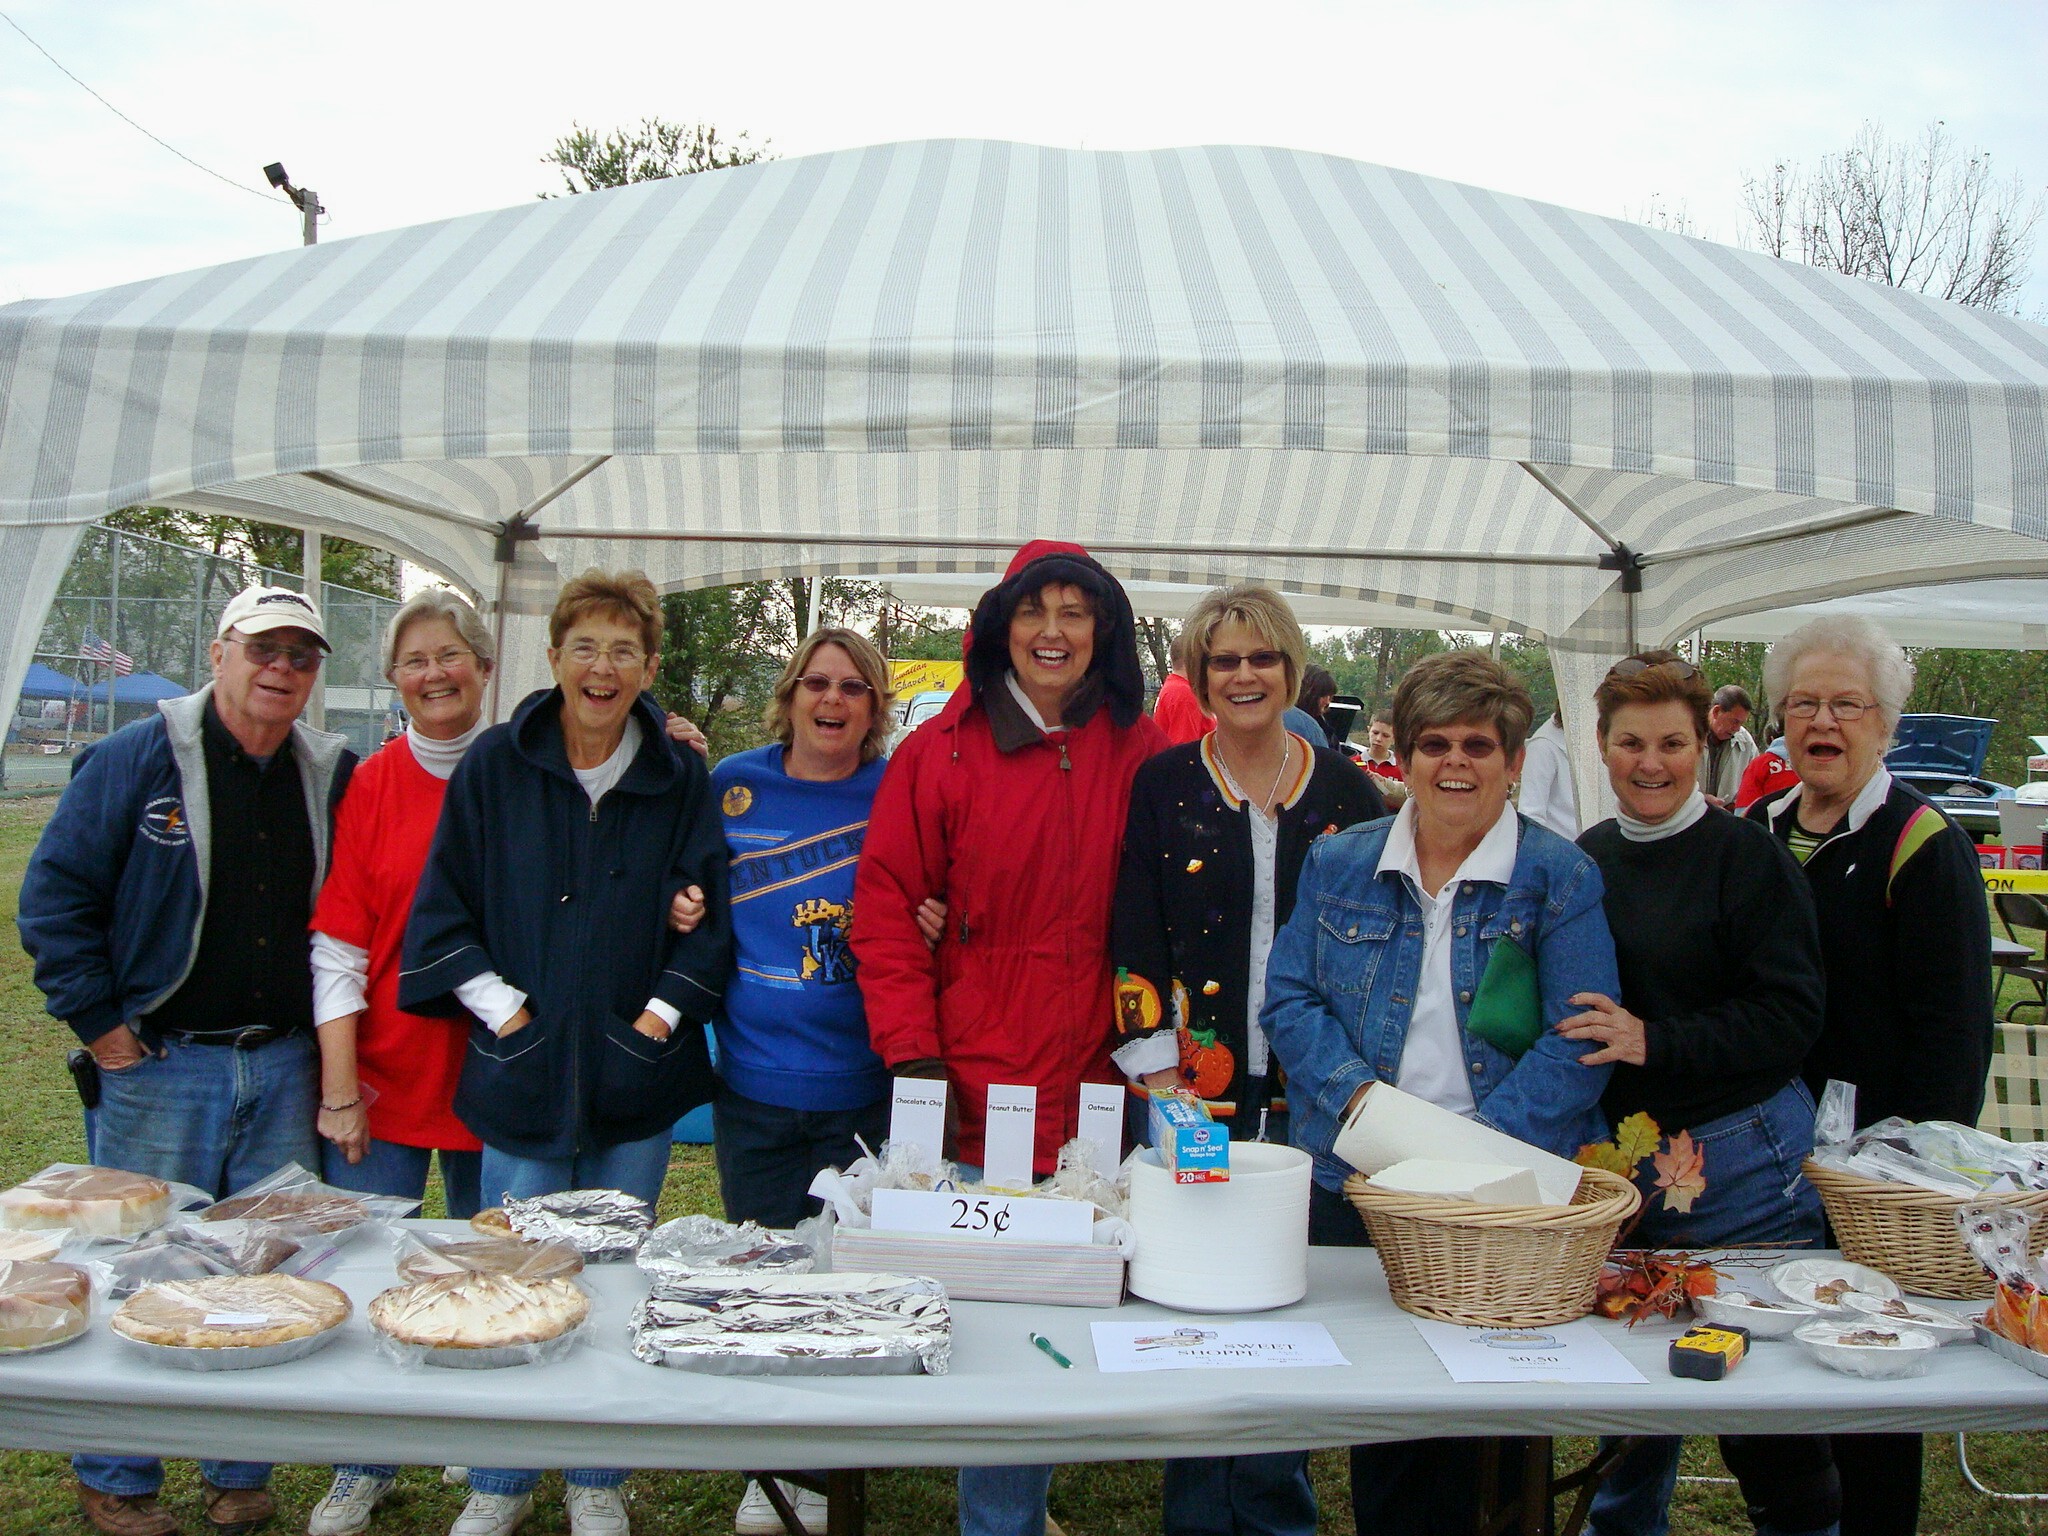 Some members of the Livermore Woman's Club at the Livermore Riverfest